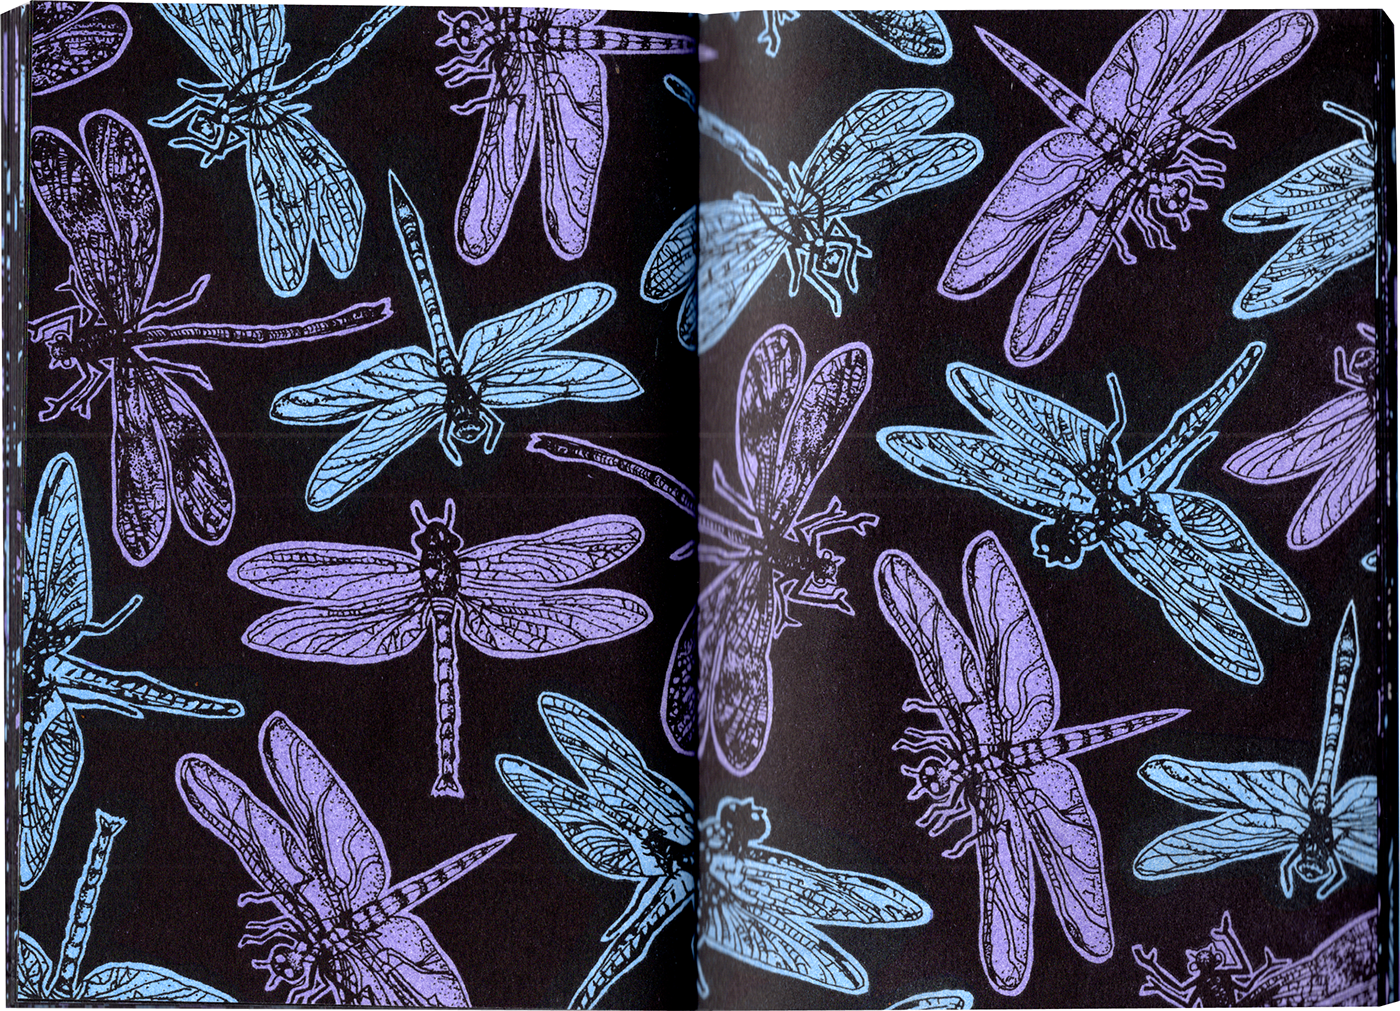 Dragonflies & Decay zine by Leanna Perry is a collection of delicate pattern-based illustrations.